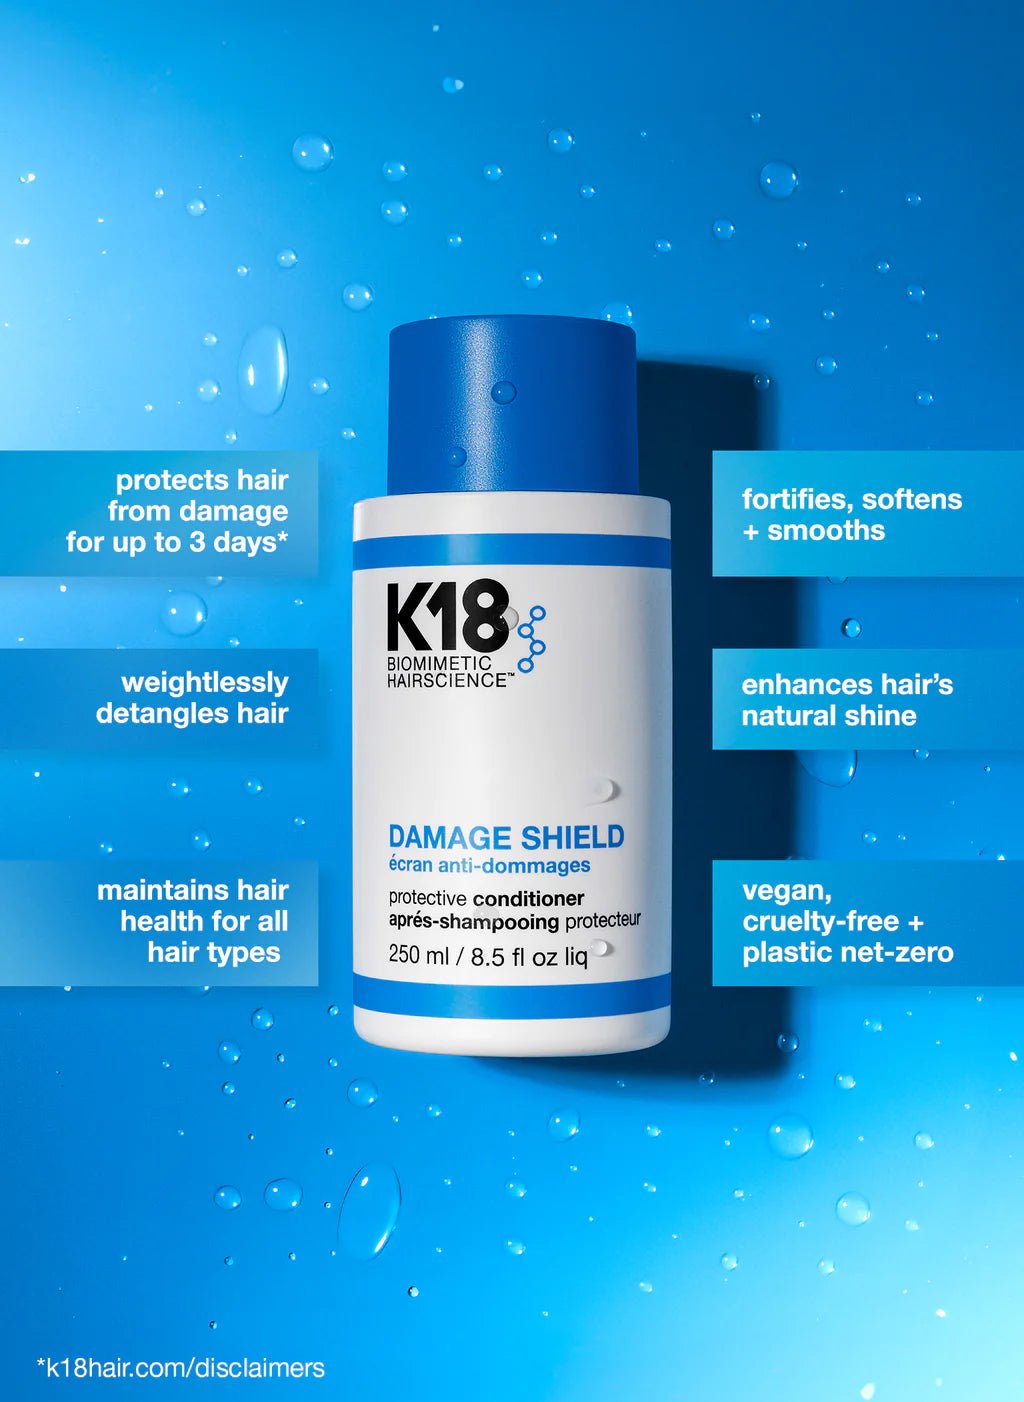 An image of K18 Hair Repair K18 Damage Shield pH Protective Conditioner. The bottle is surrounded by text highlighting its benefits, including damage protection, hair fortification, and being both vegan and cruelty-free.